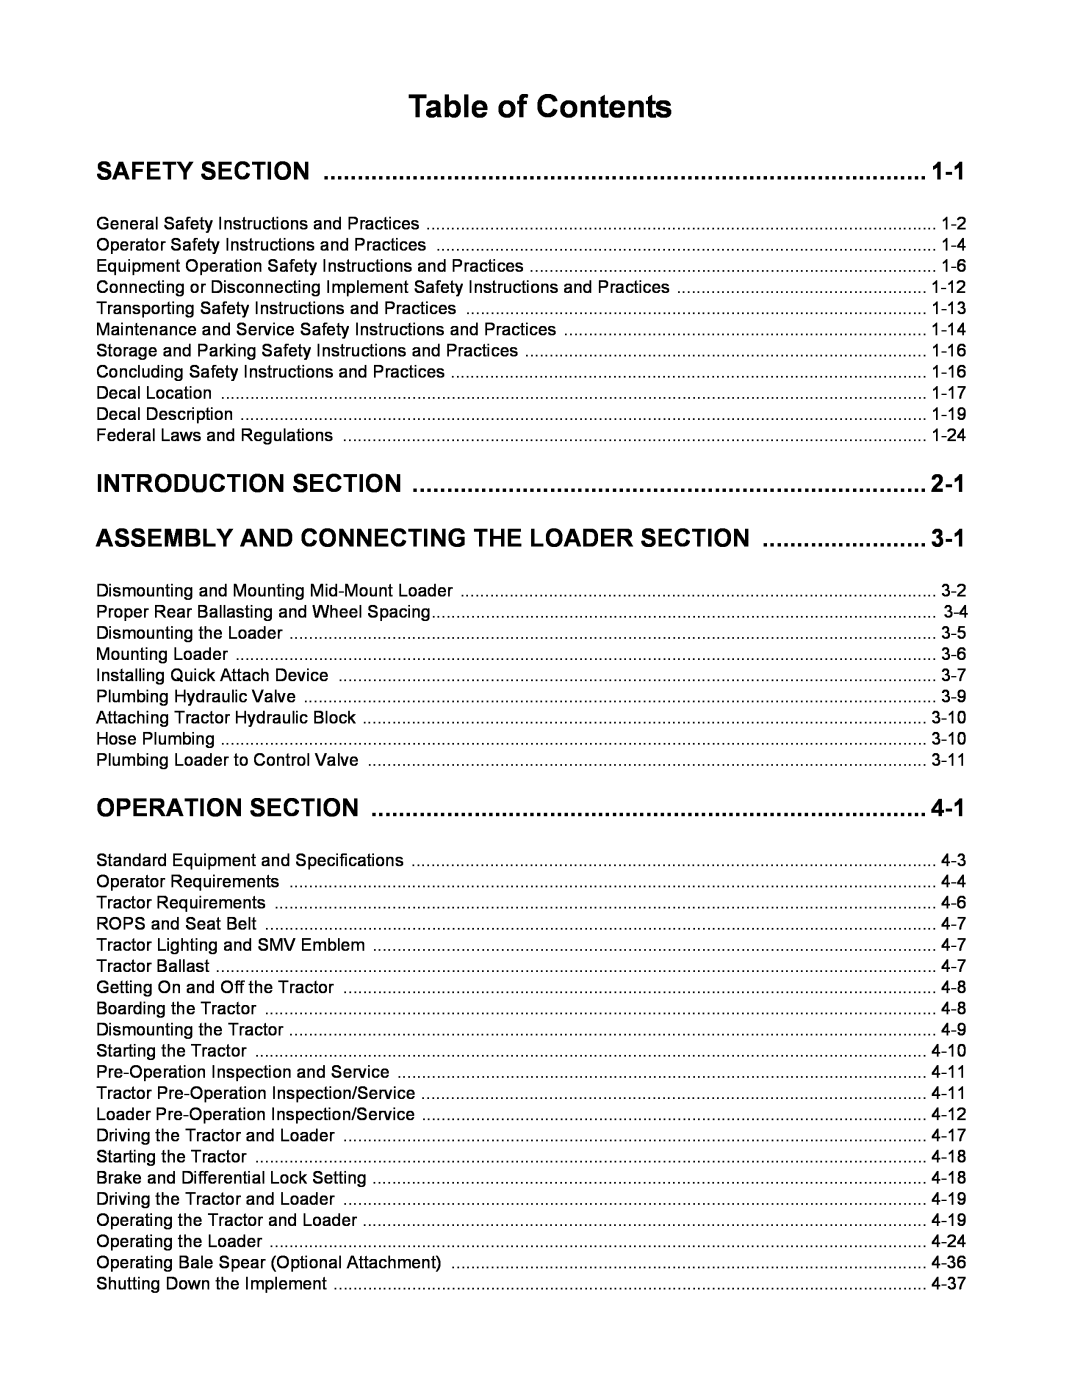 Alamo 1595 manual Table of Contents, Safety Section, Introduction Section, Assembly And Connecting The Loader Section 